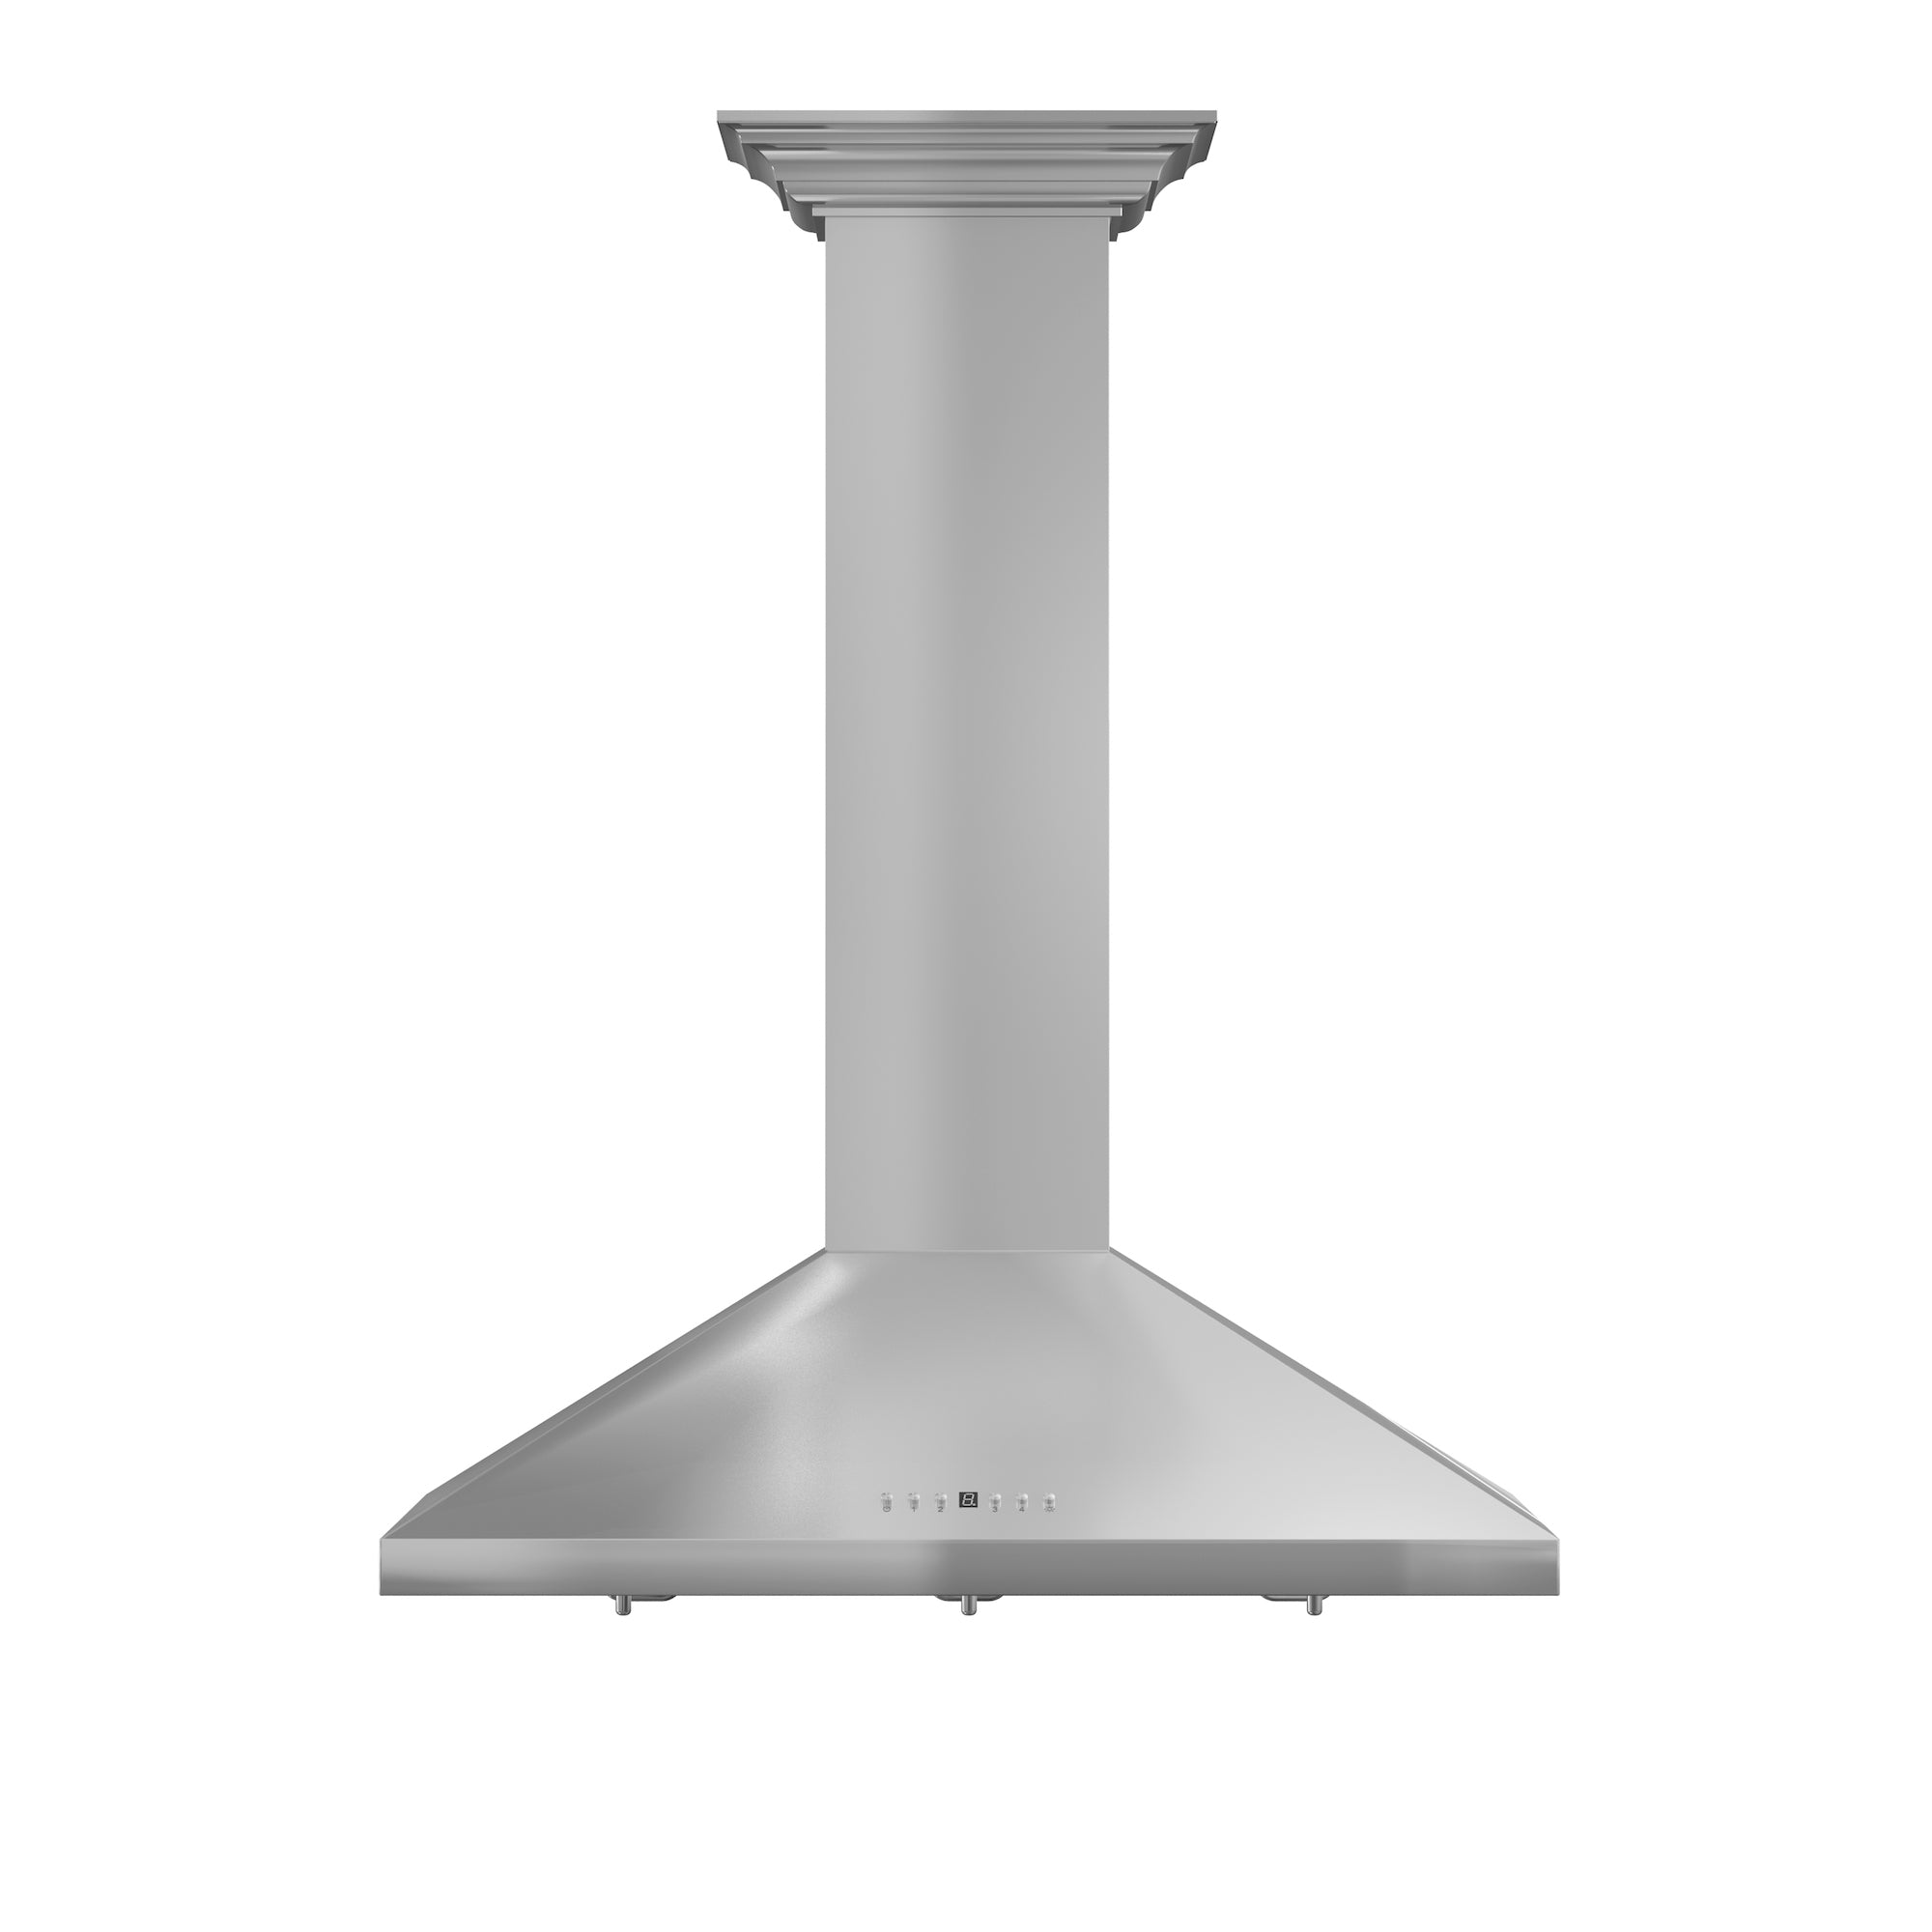 ZLINE 36" Convertible Vent Wall Mount Range Hood in Stainless Steel with Crown Molding (KL2CRN-36)